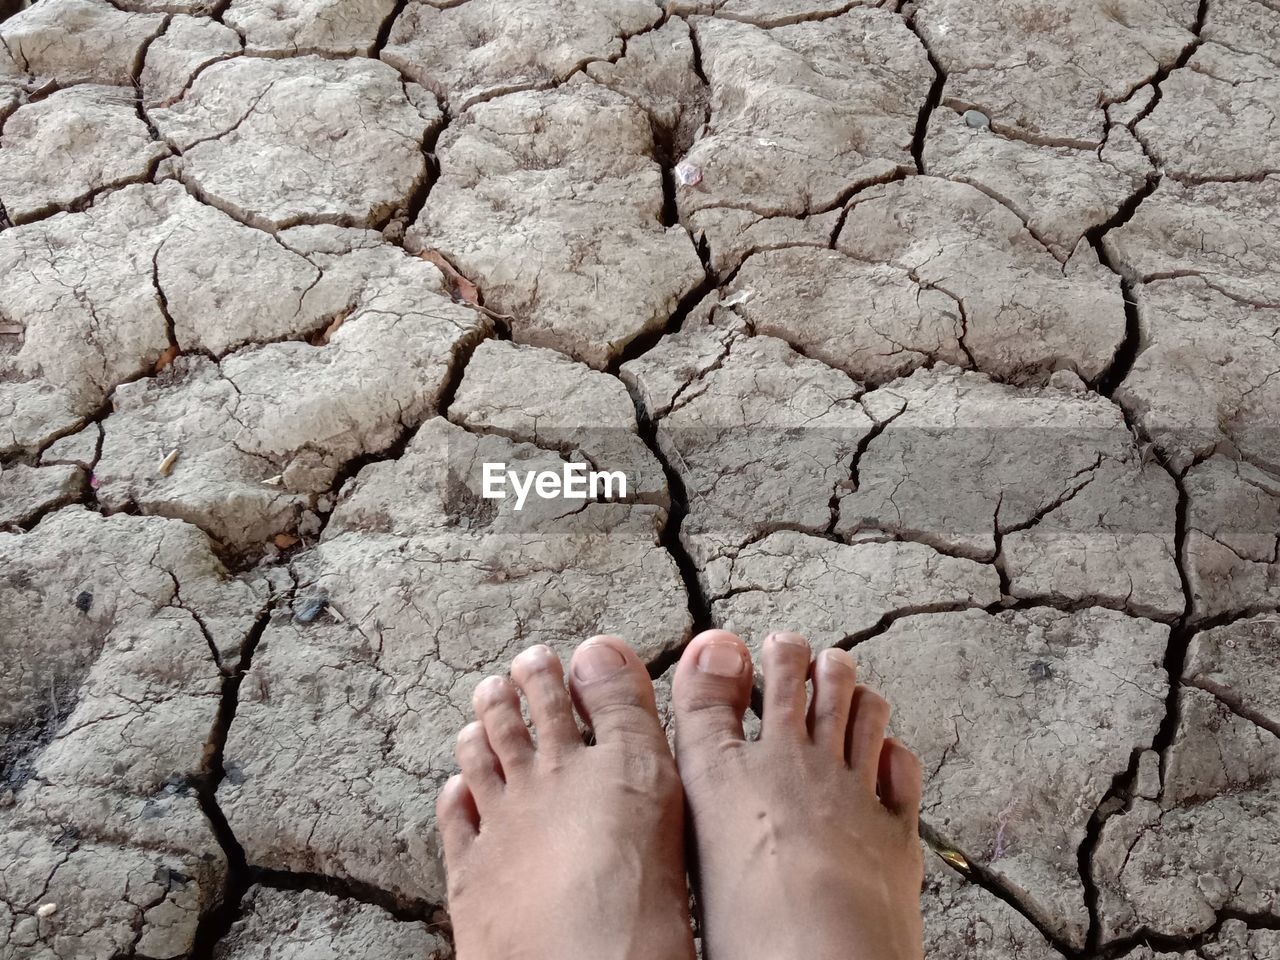 Prolonged drought left the ground fractured and hot feet